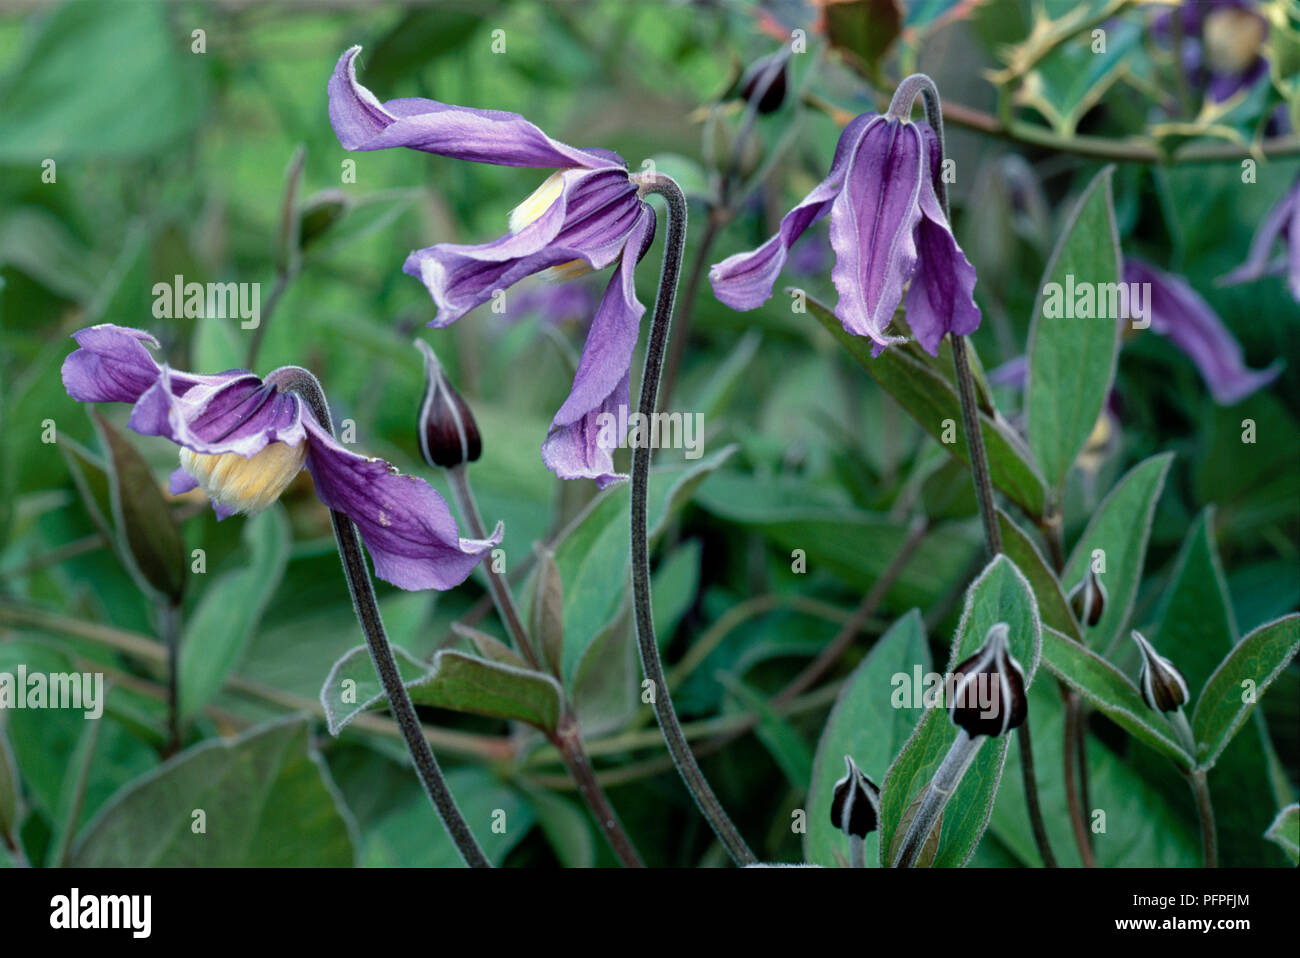 Clematis x eriostemon 'Hendersonii', showing purple flowers, unfurled buds, and green leaves on tall stems, close-up Stock Photo